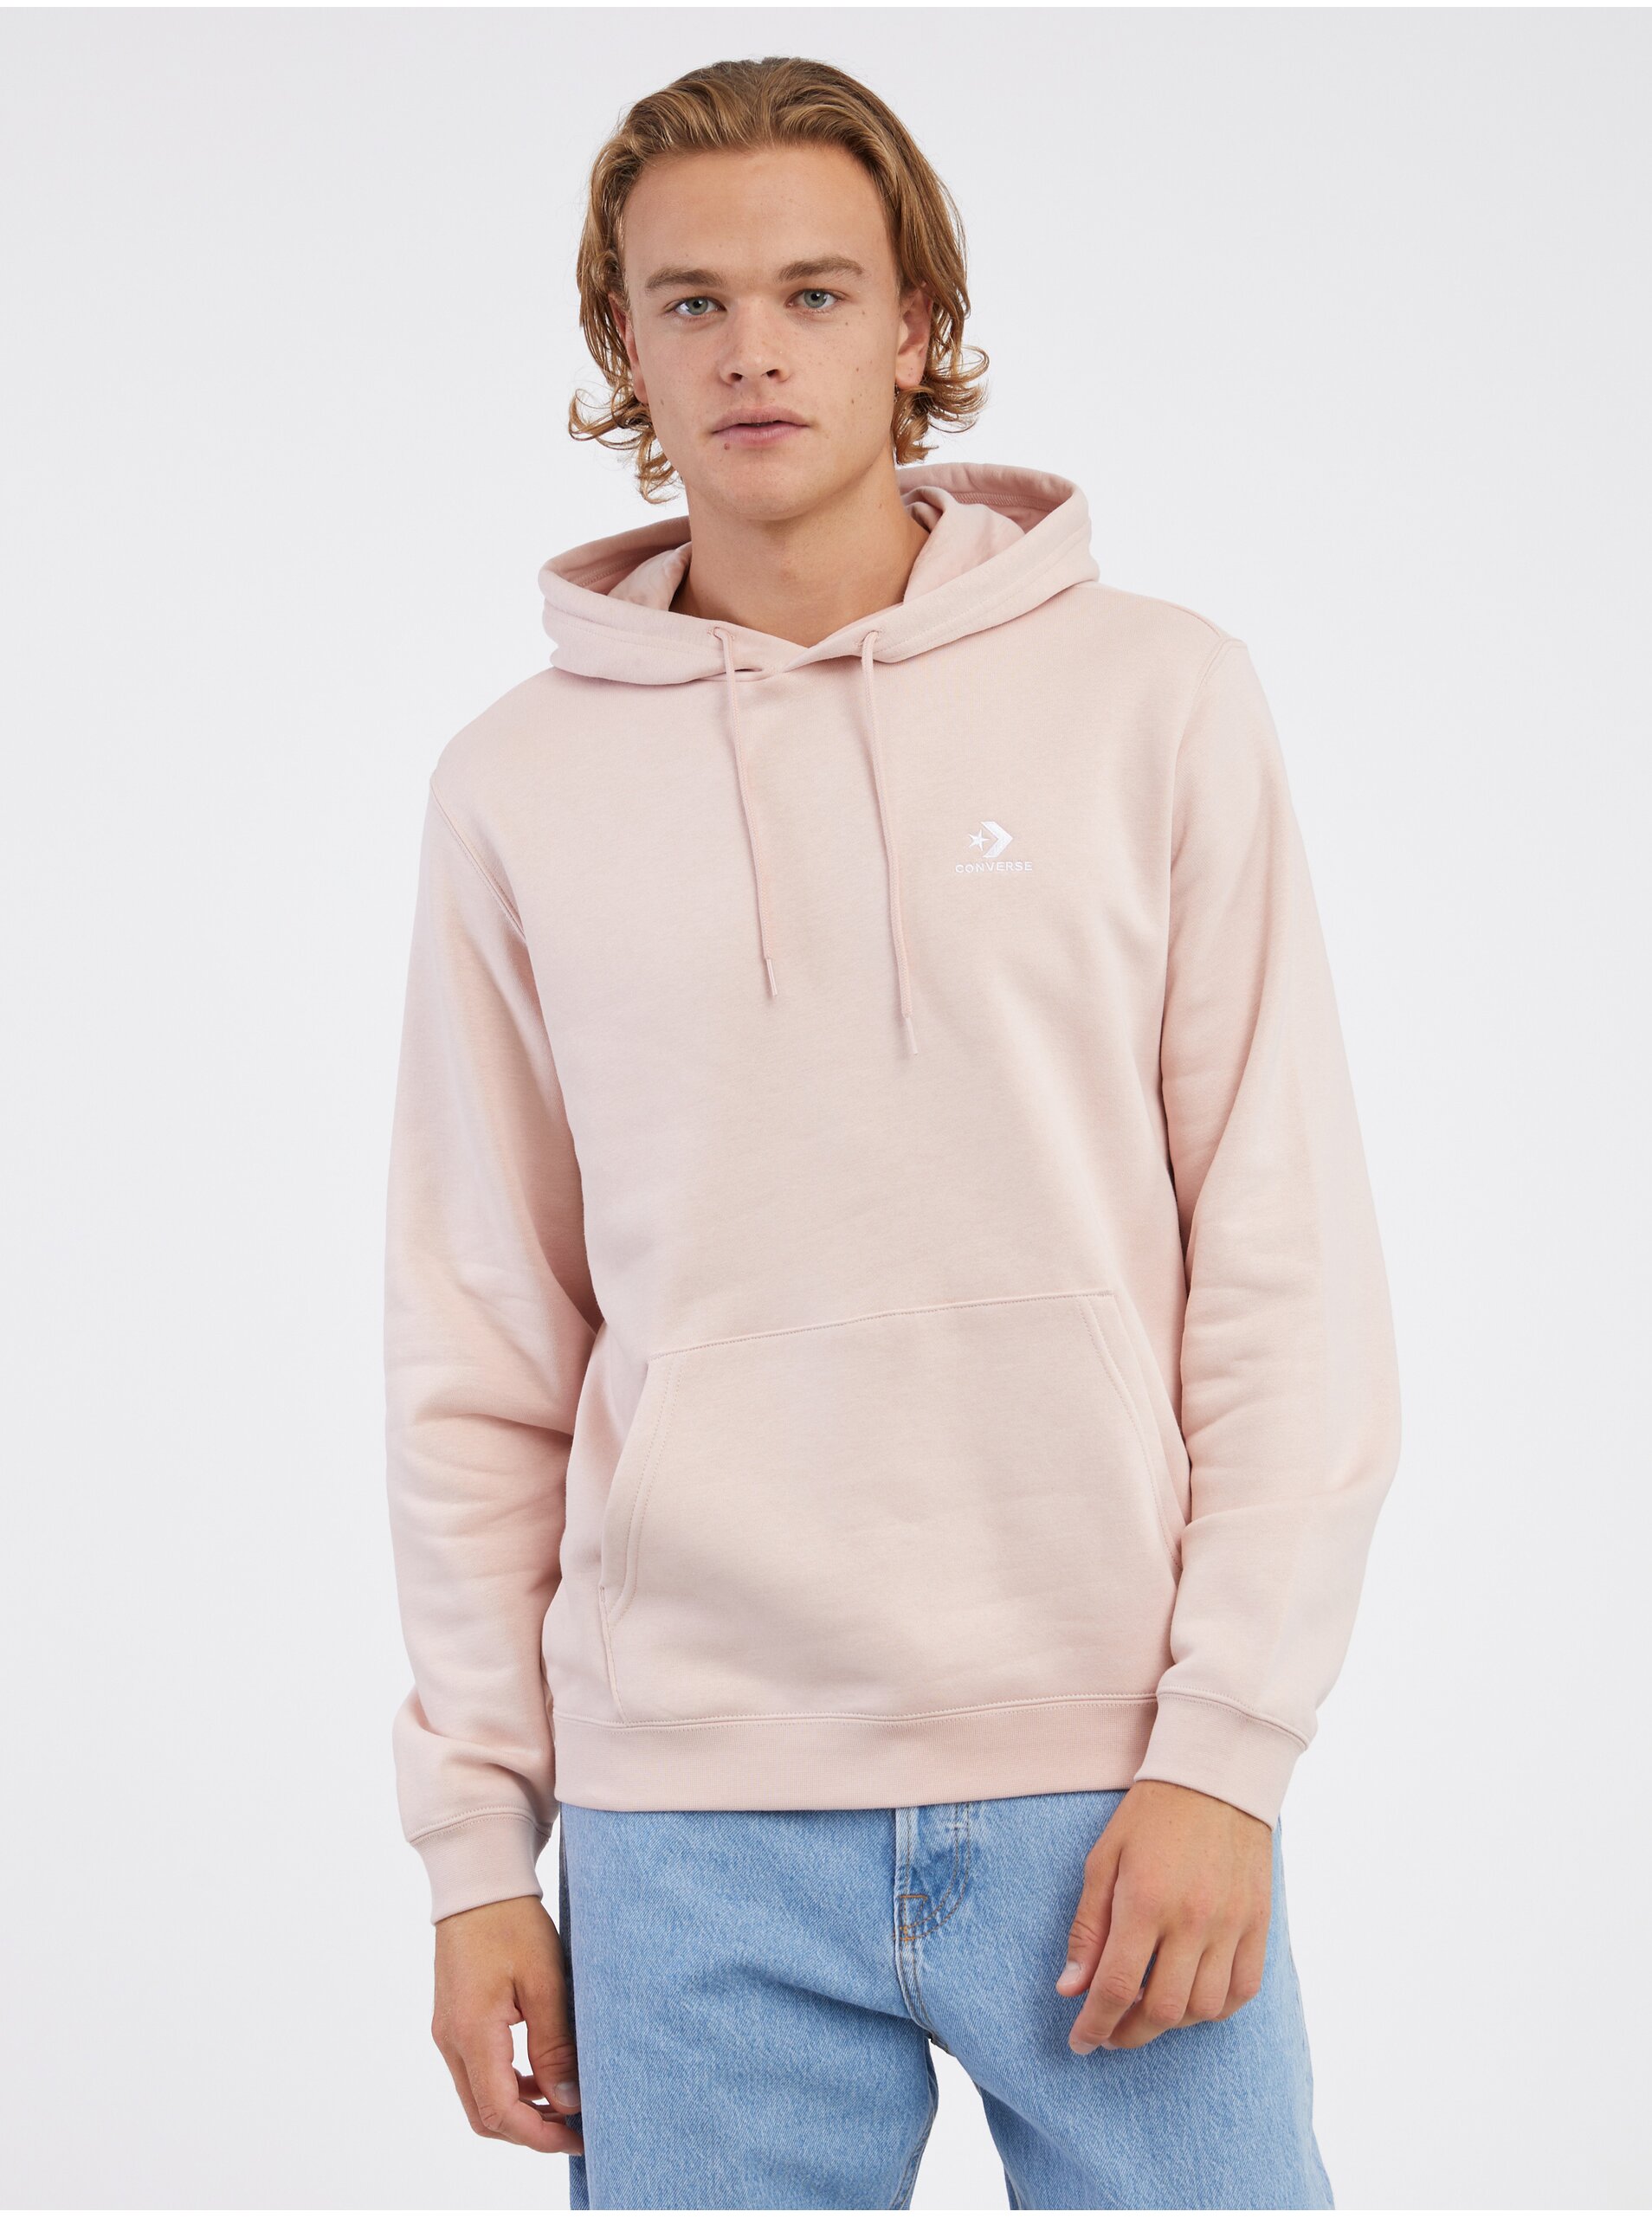 Light Pink Unisex Hoodie Converse Go-To Embroidered - Men